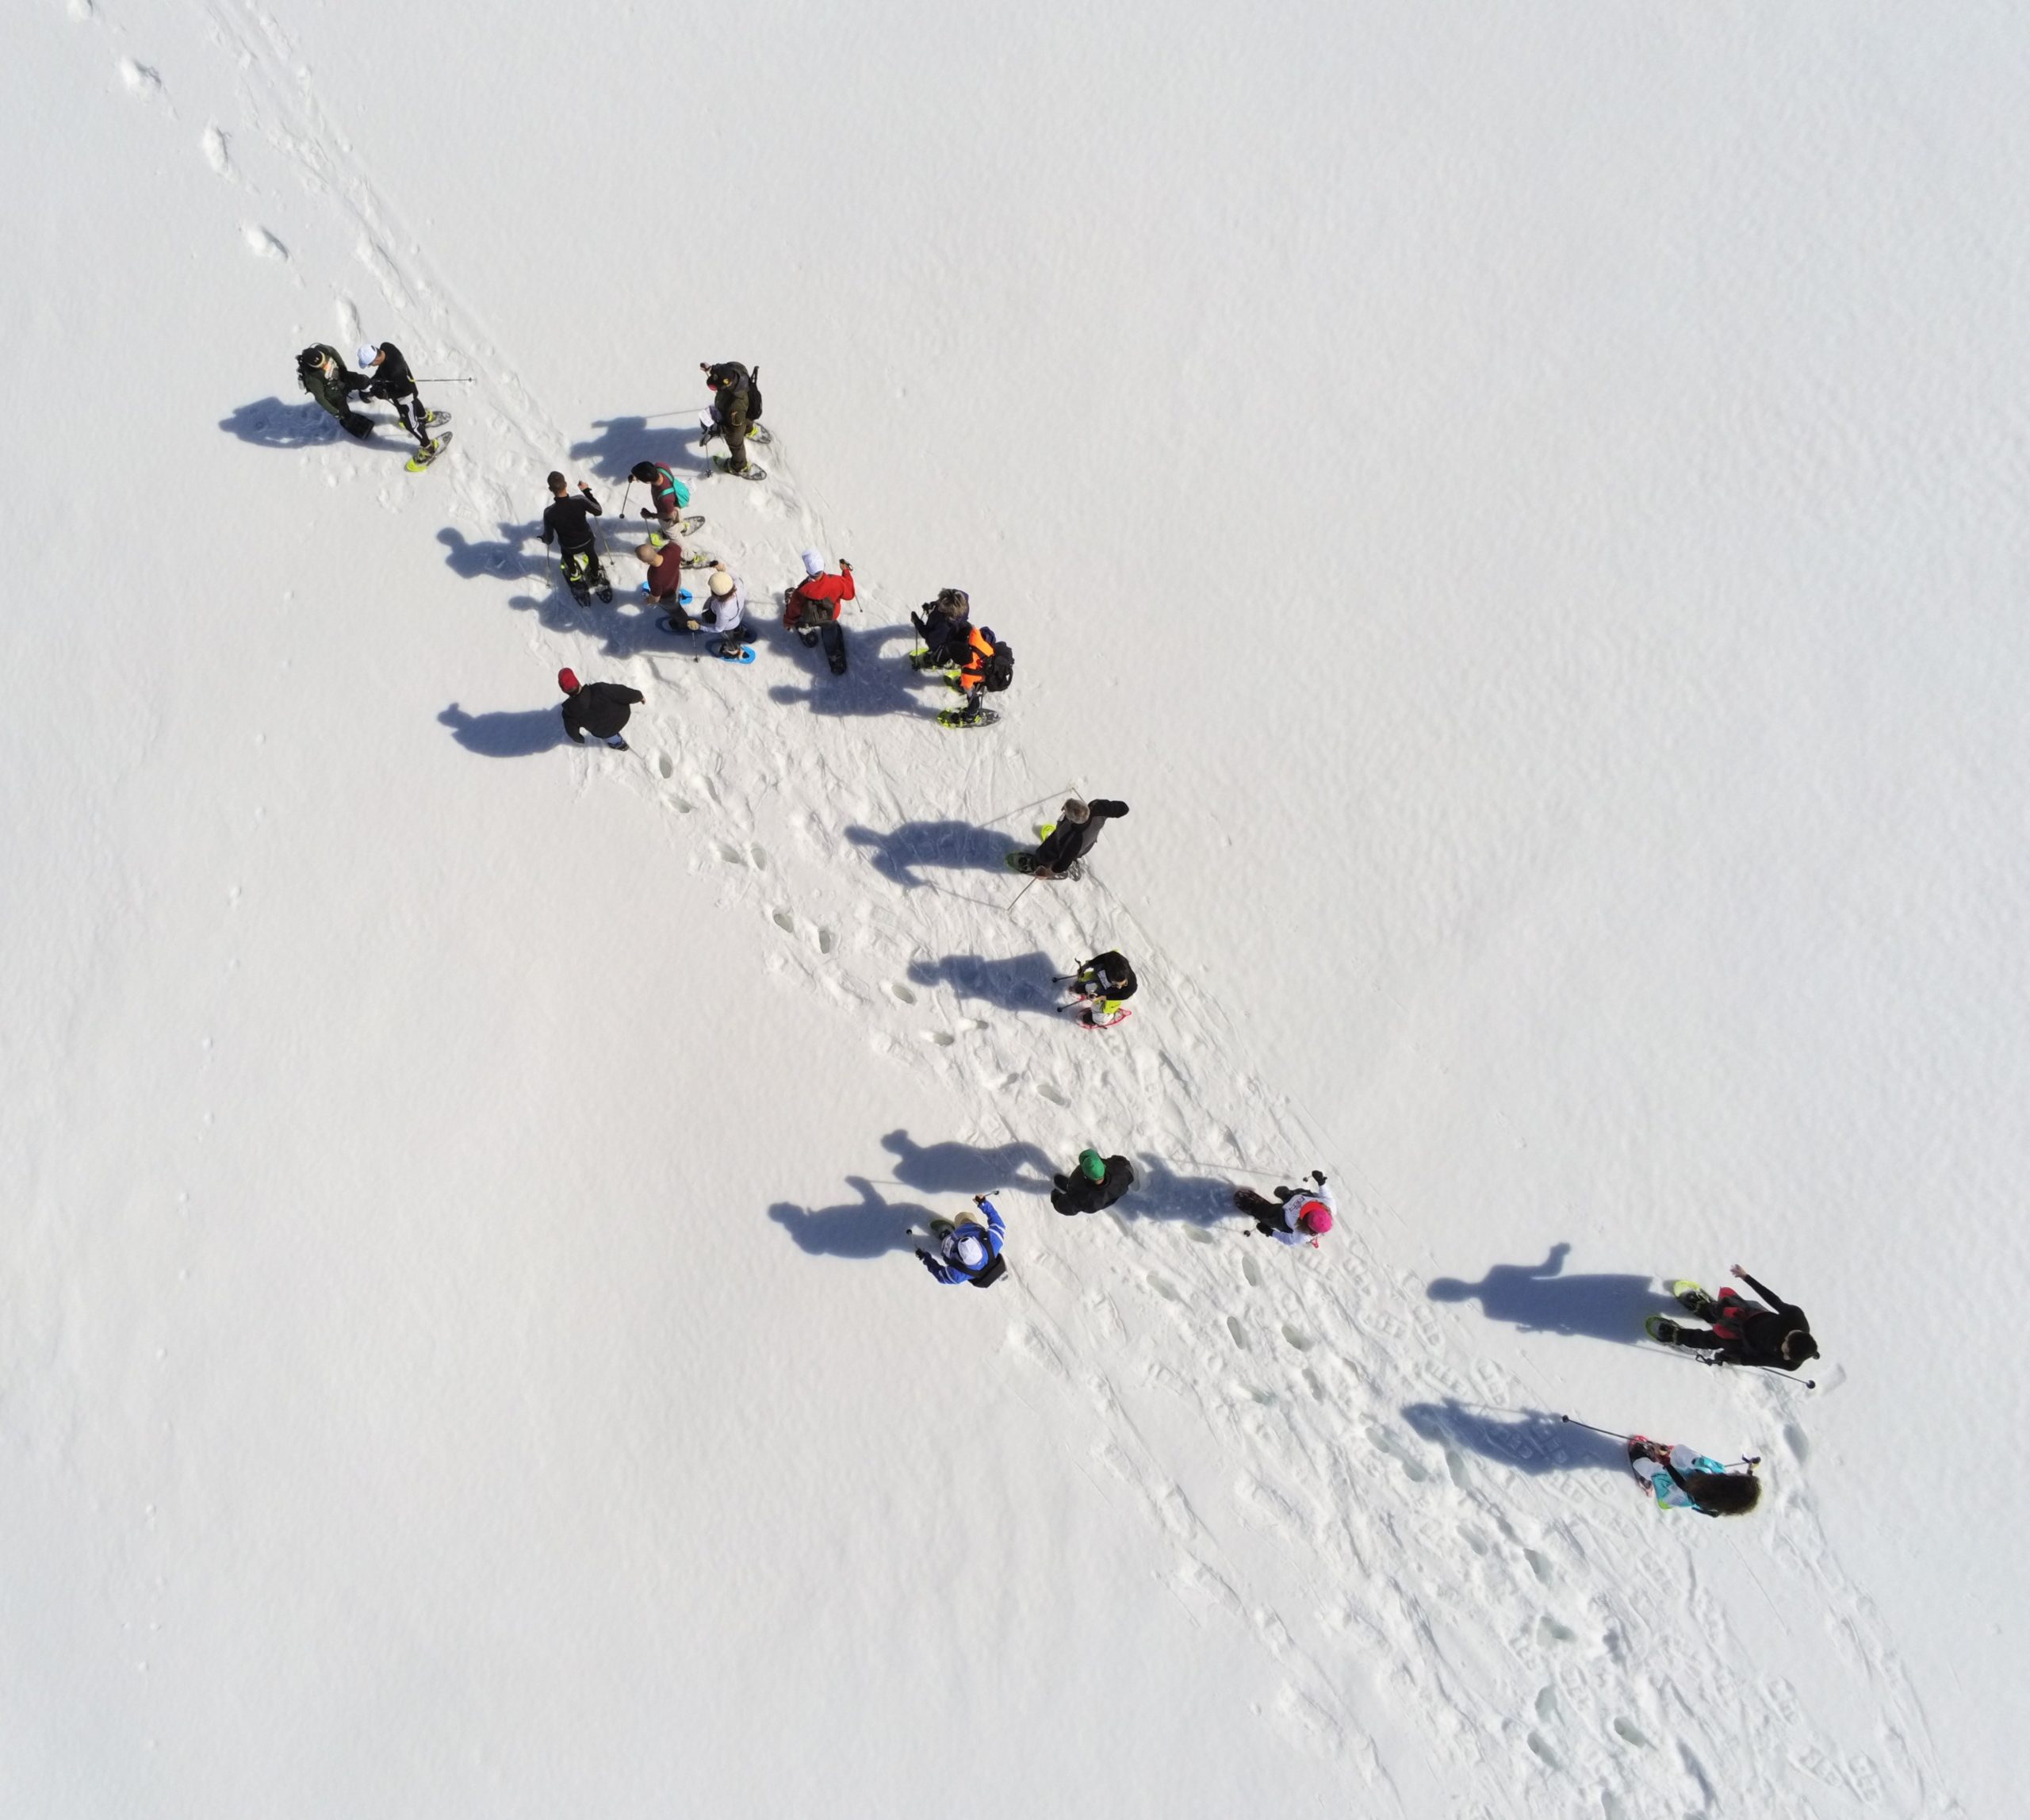 Group of people on snow